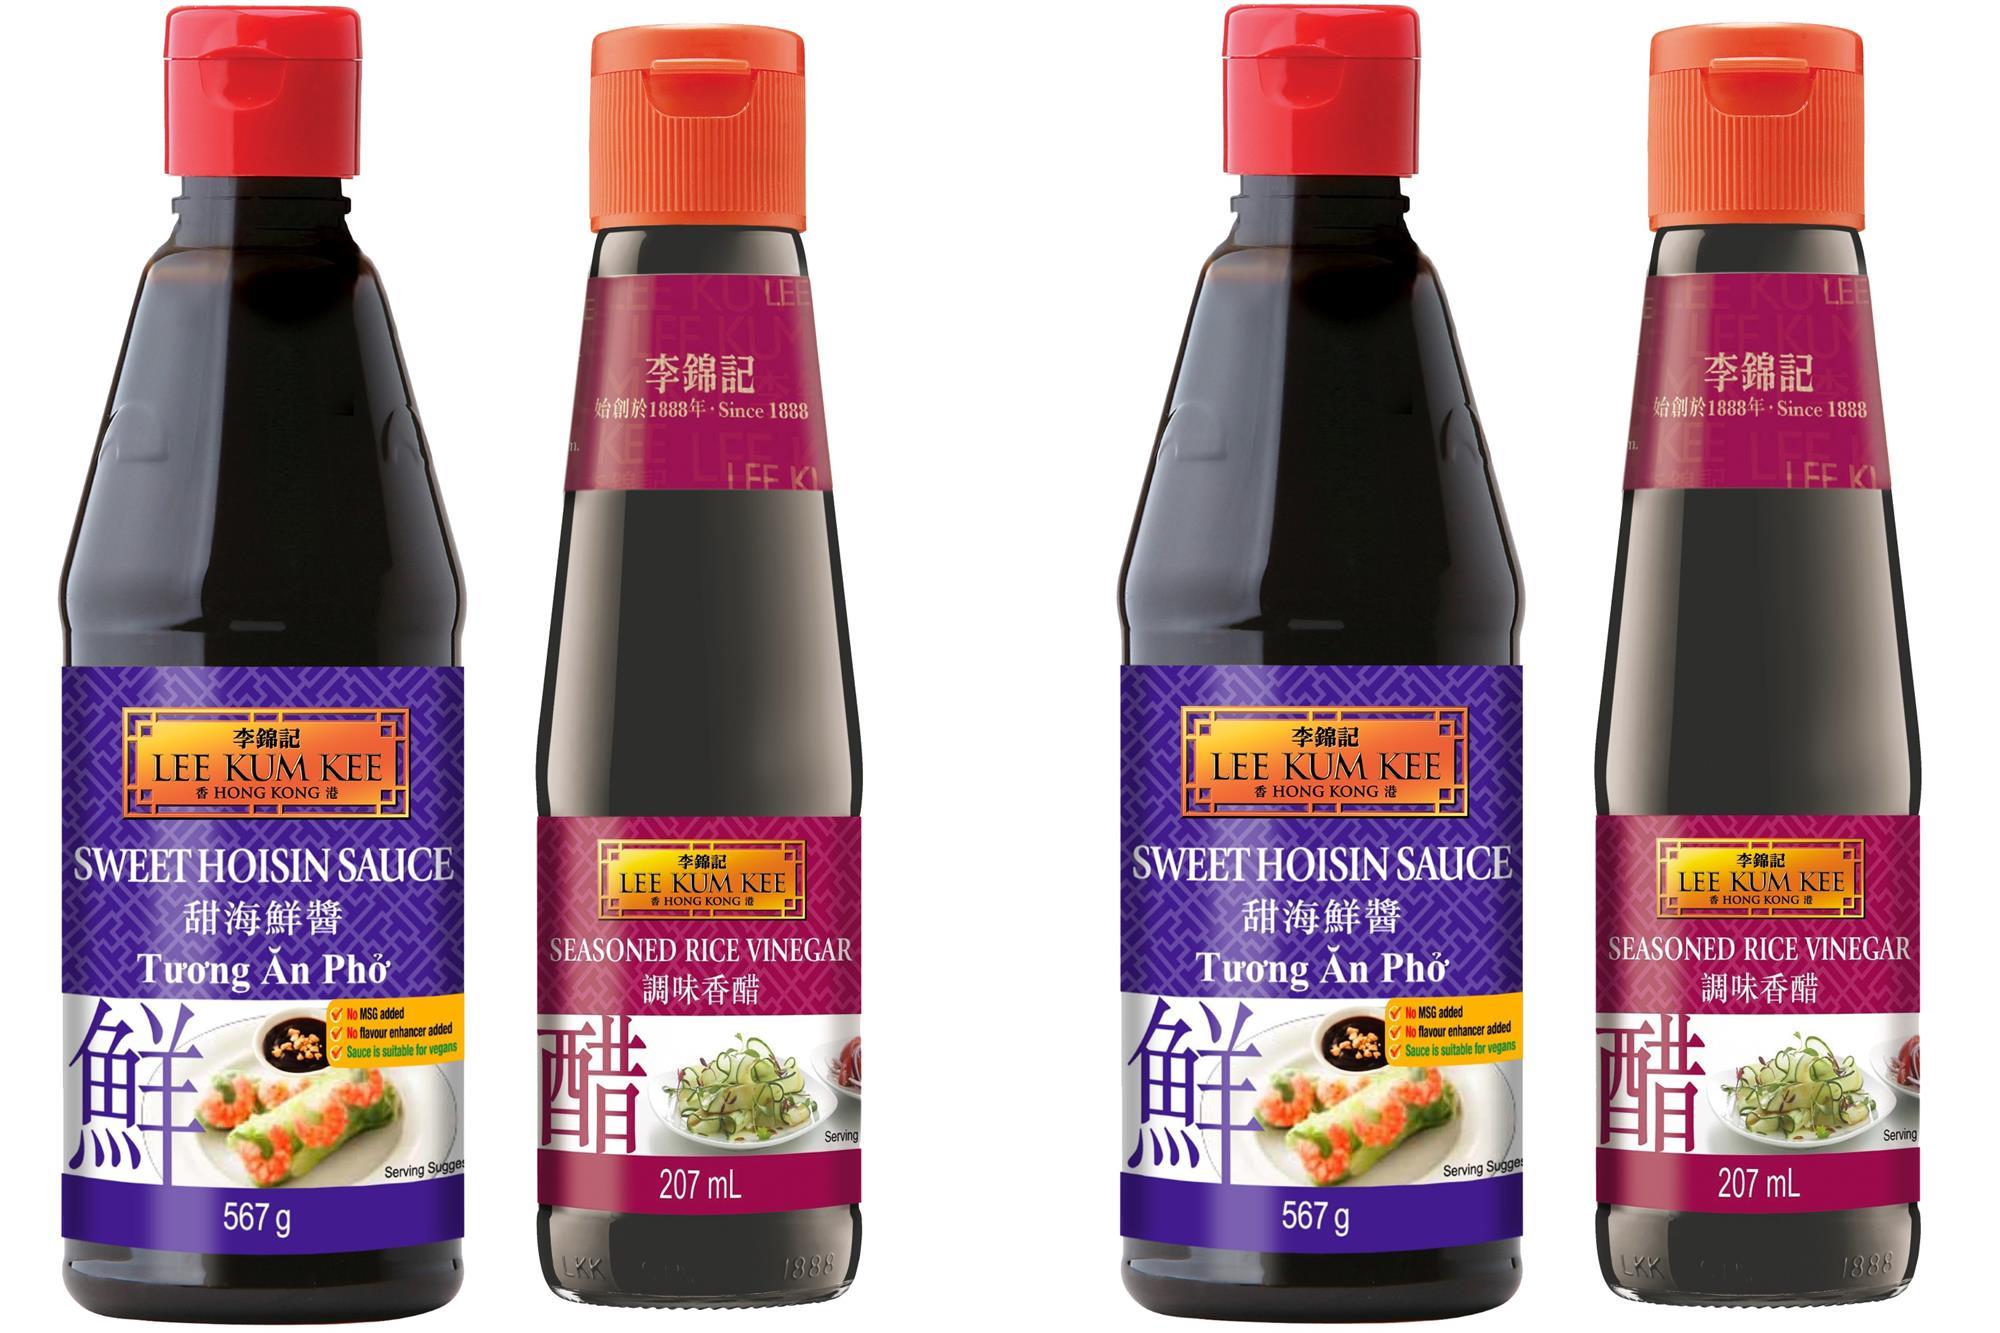 Lee Kum Kee adds two new cooking sauces to lineup | News | The Grocer